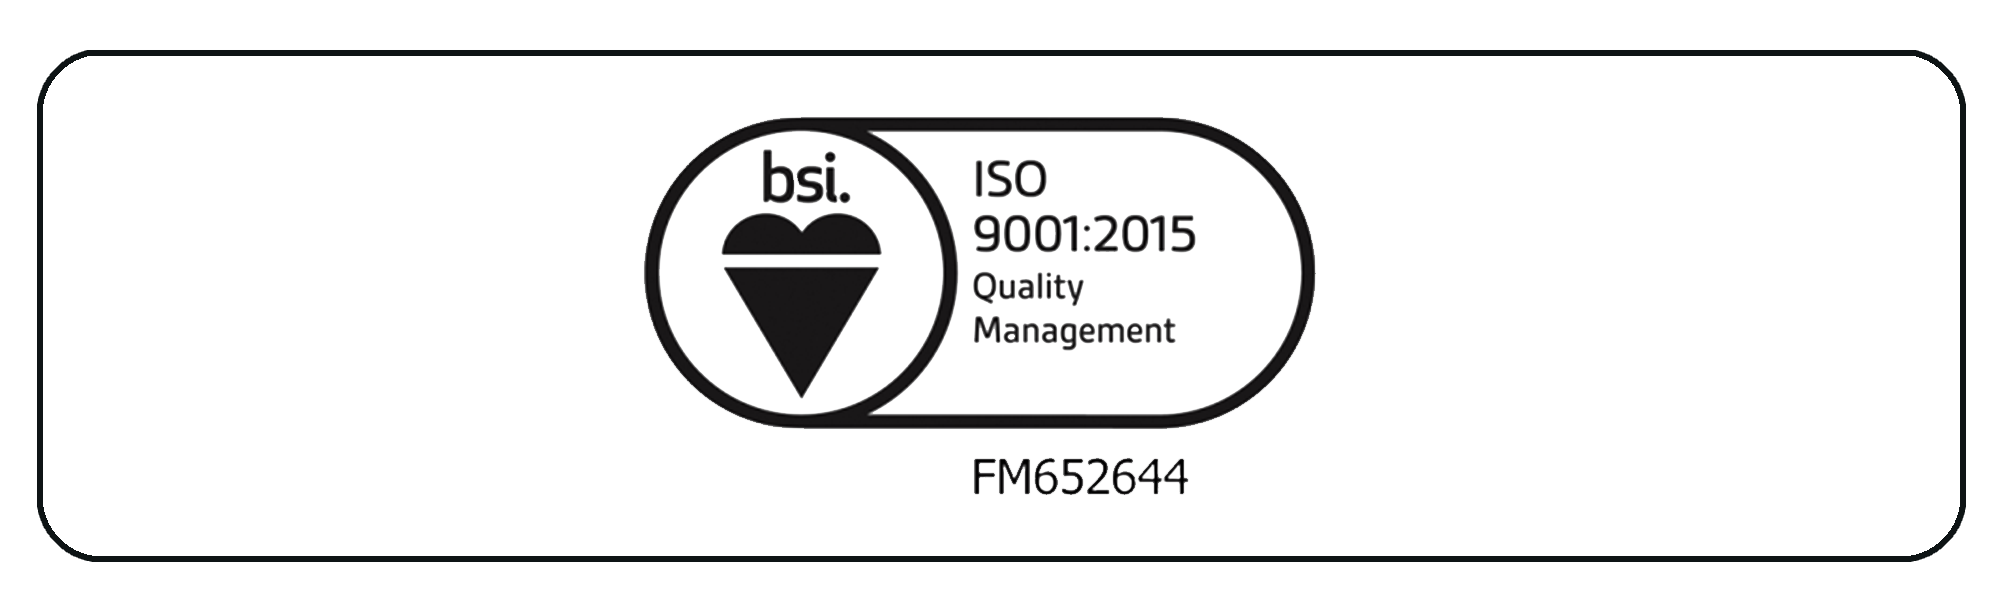 bsi iso 9001:2015 quality management banner